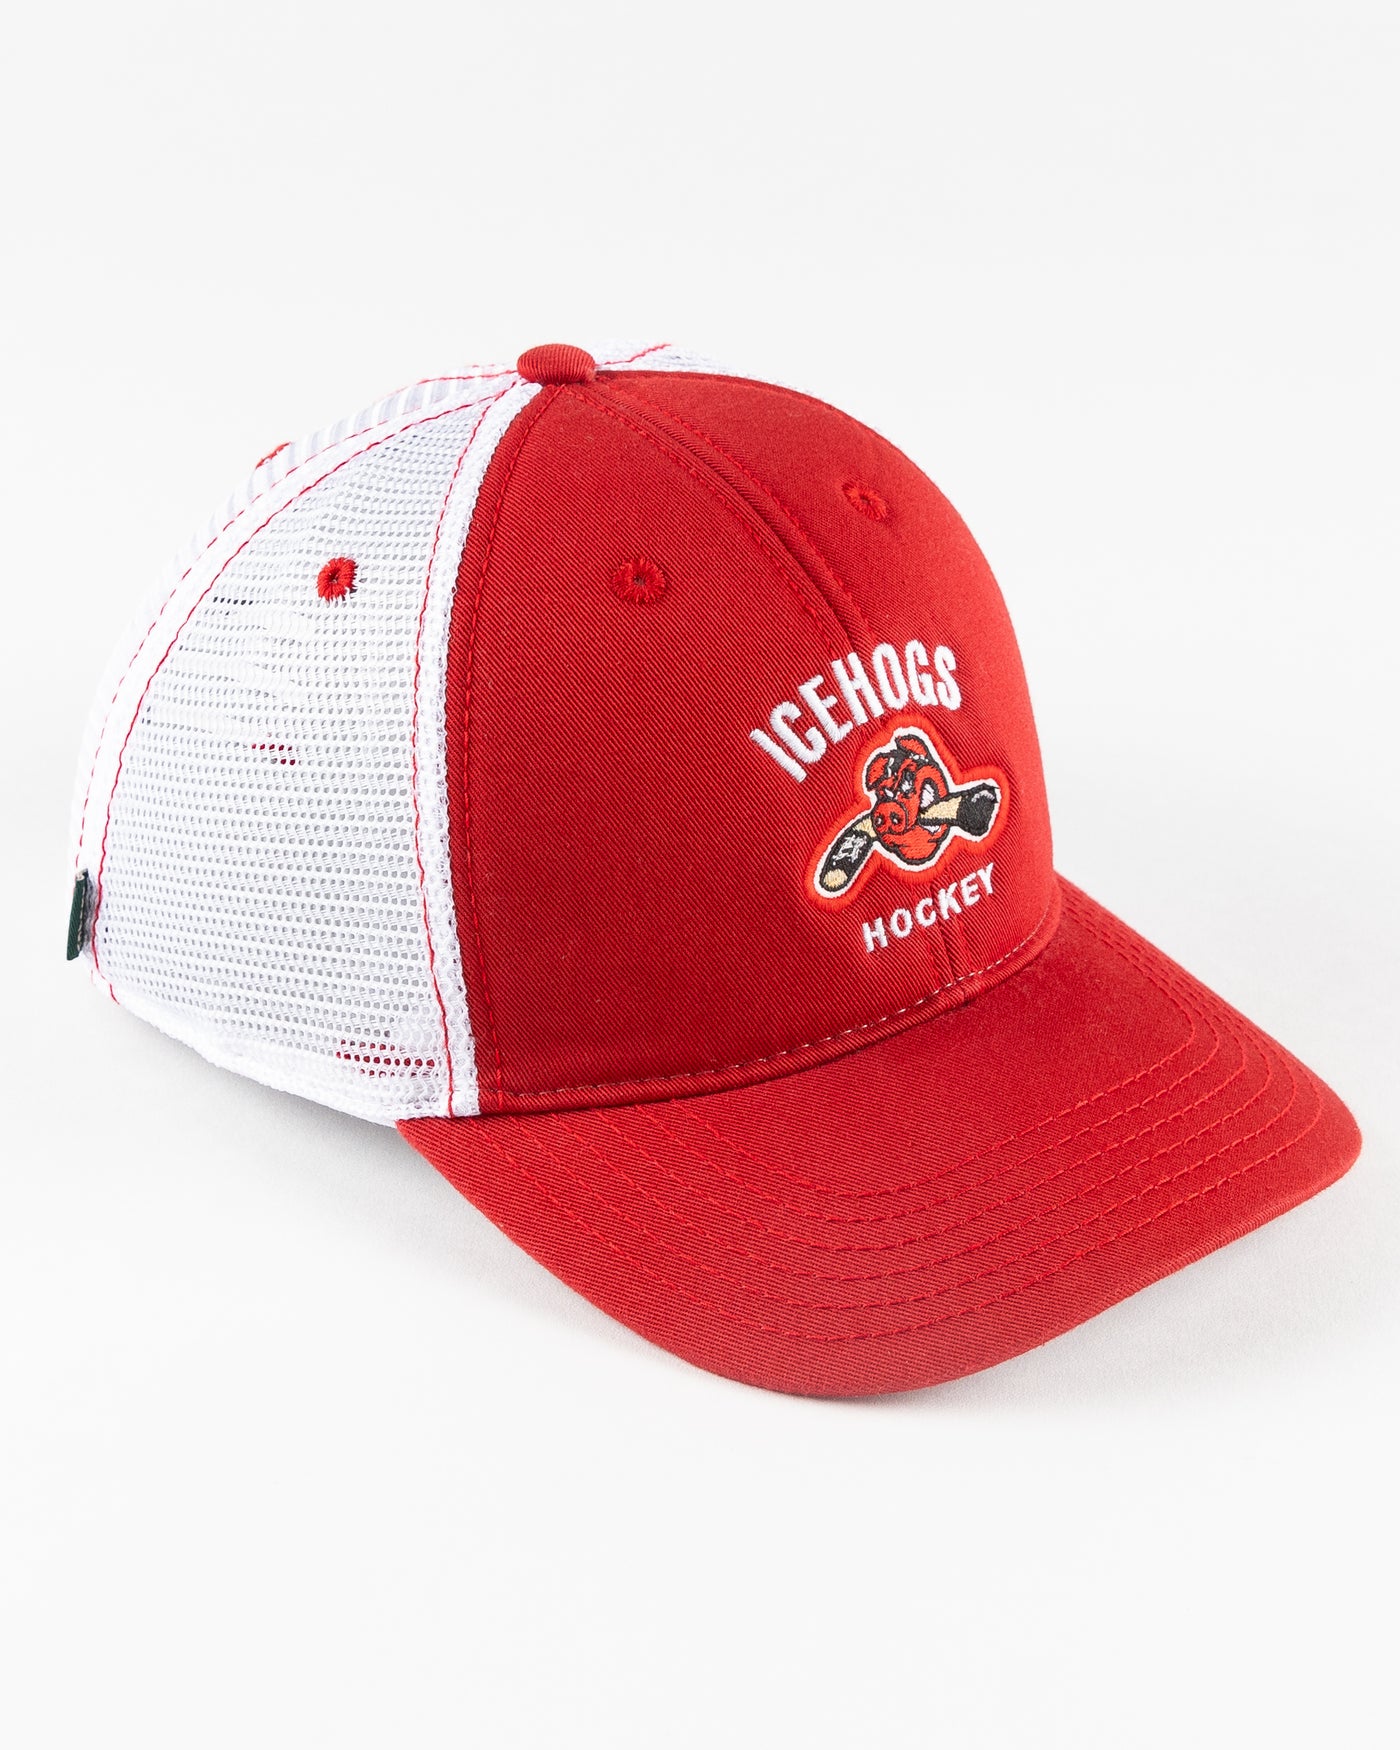 red and white Rockford IceHogs trucker with embroidered design - right angle lay flat